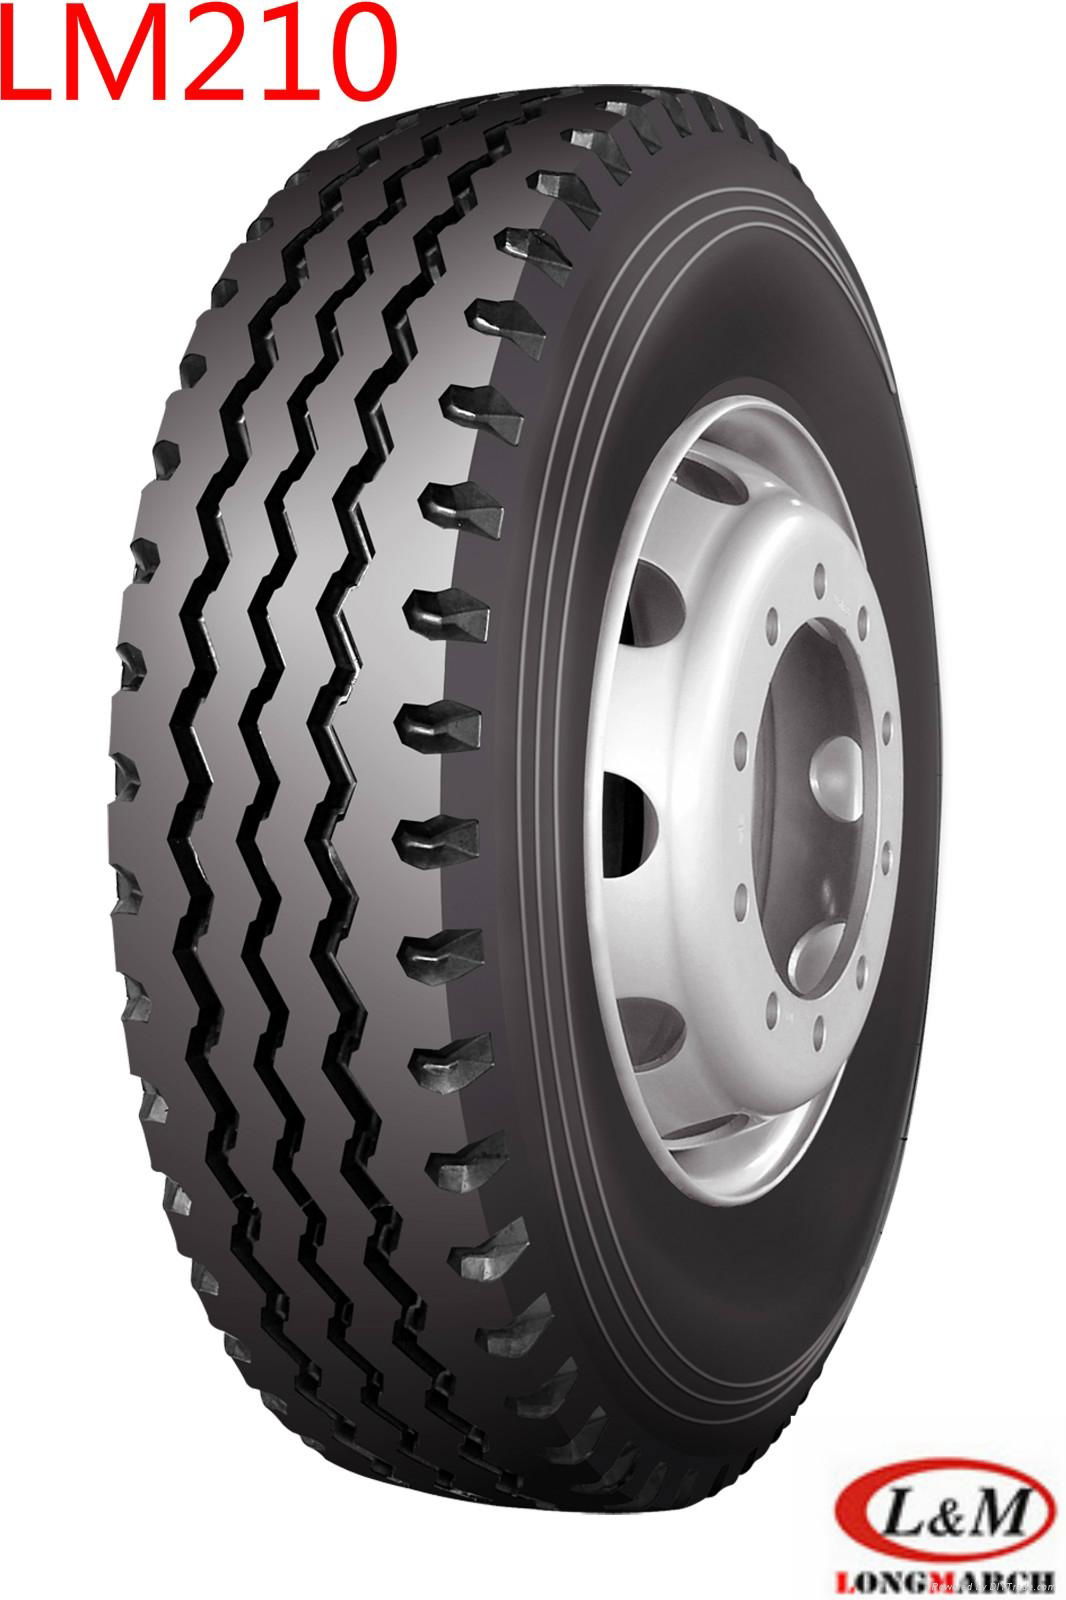 Long March/Roadlux All Position Radial Truck Tire (LM210)